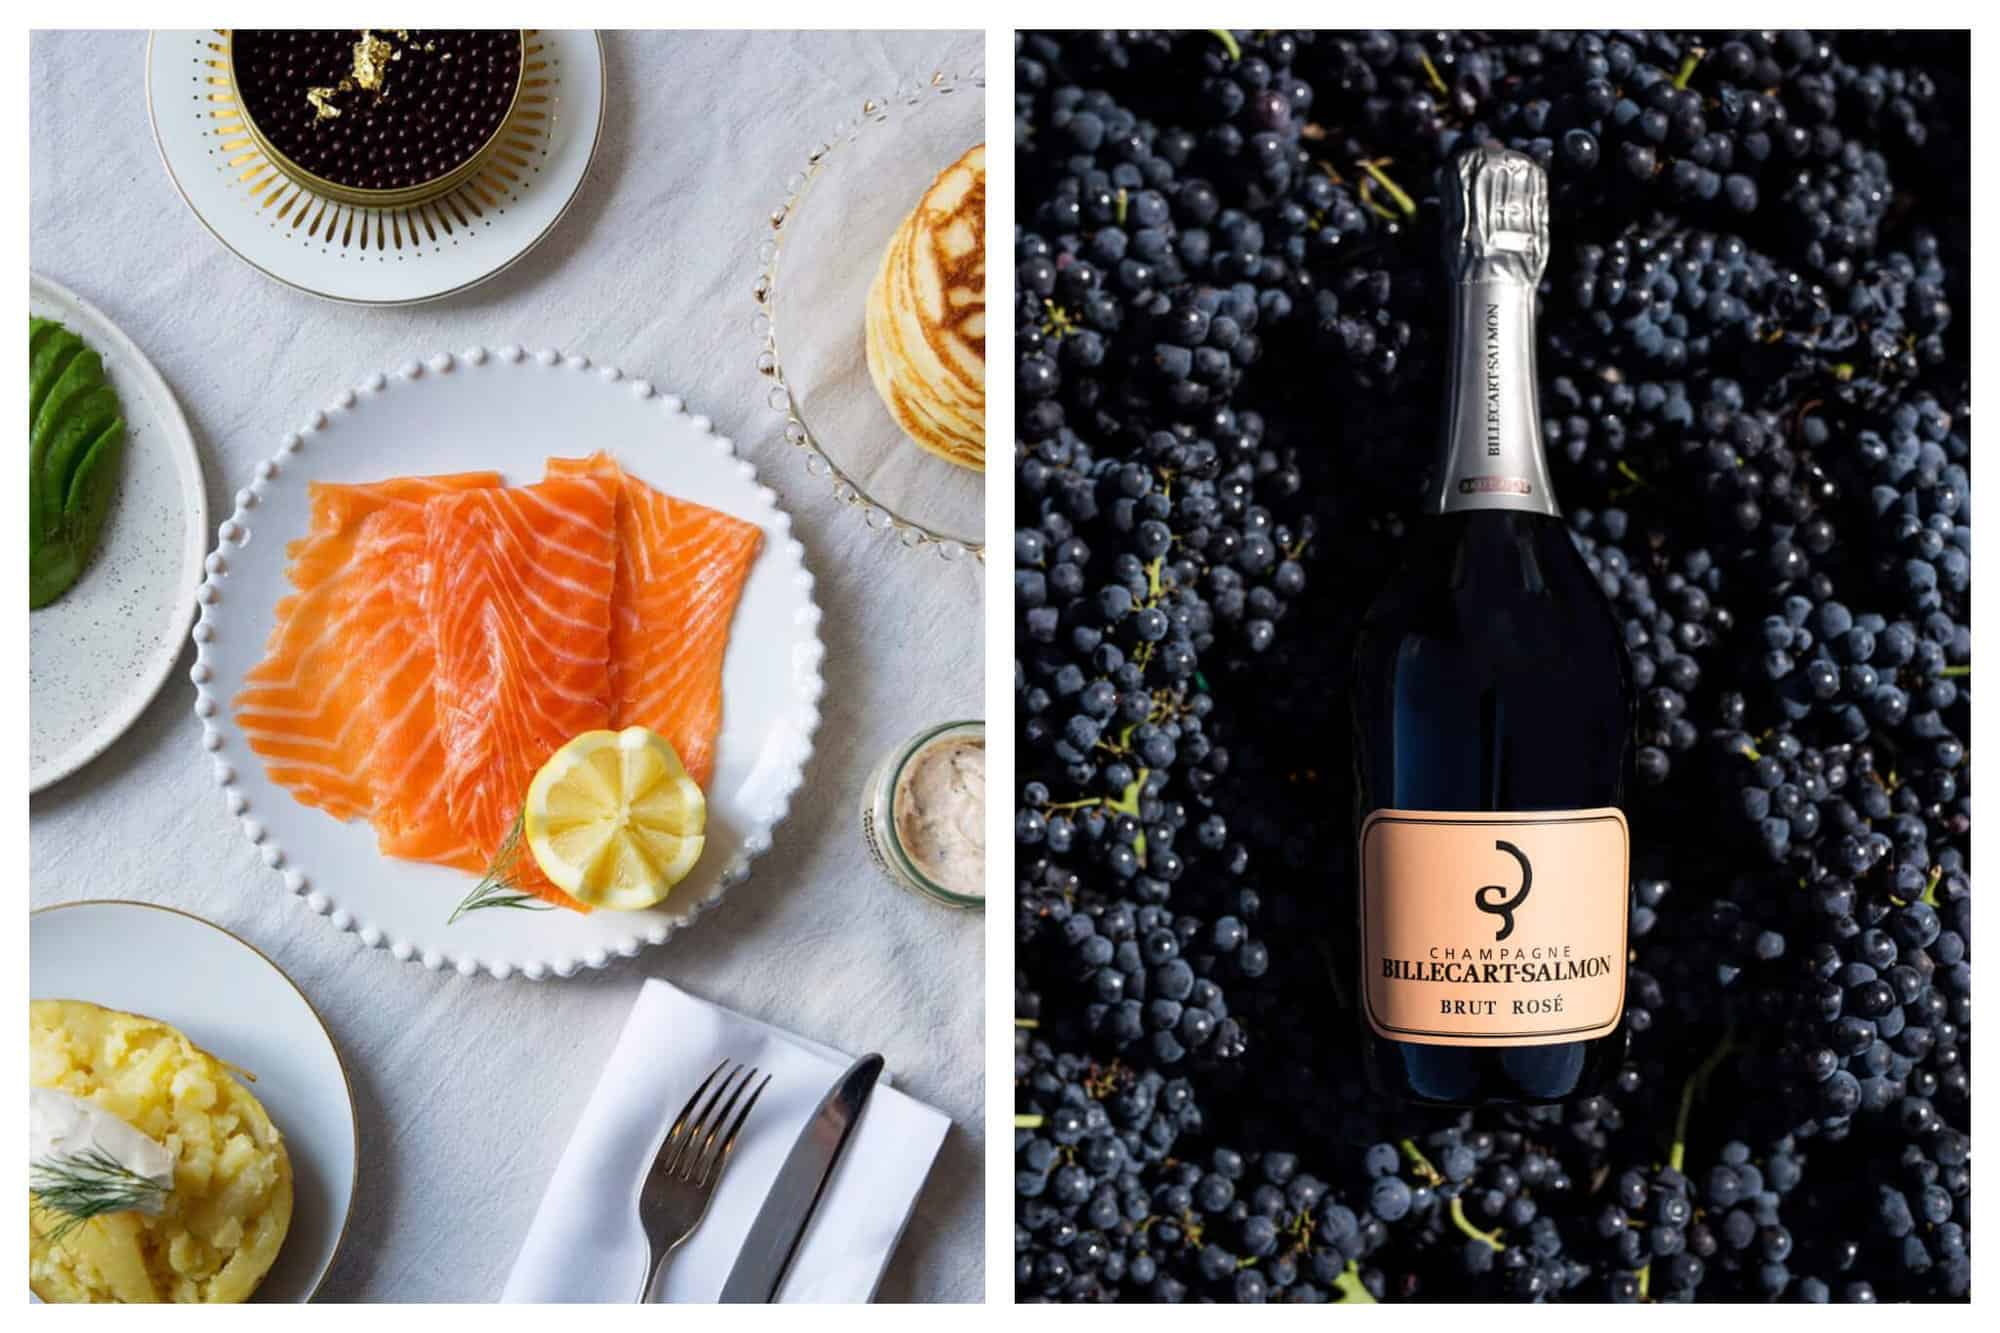 Left: an aerial view of a plate of smoked salmon. There is a half of a lemon on the plate as well. There are other food items slightly visible including blinis, avocado, caviar, and a small jar of sauce. Right: A bottle of billecart Salmon champagne laying on a bed of dark blue grapes. The label is salmon colored and there is silver aluminum at the top of the bottle.